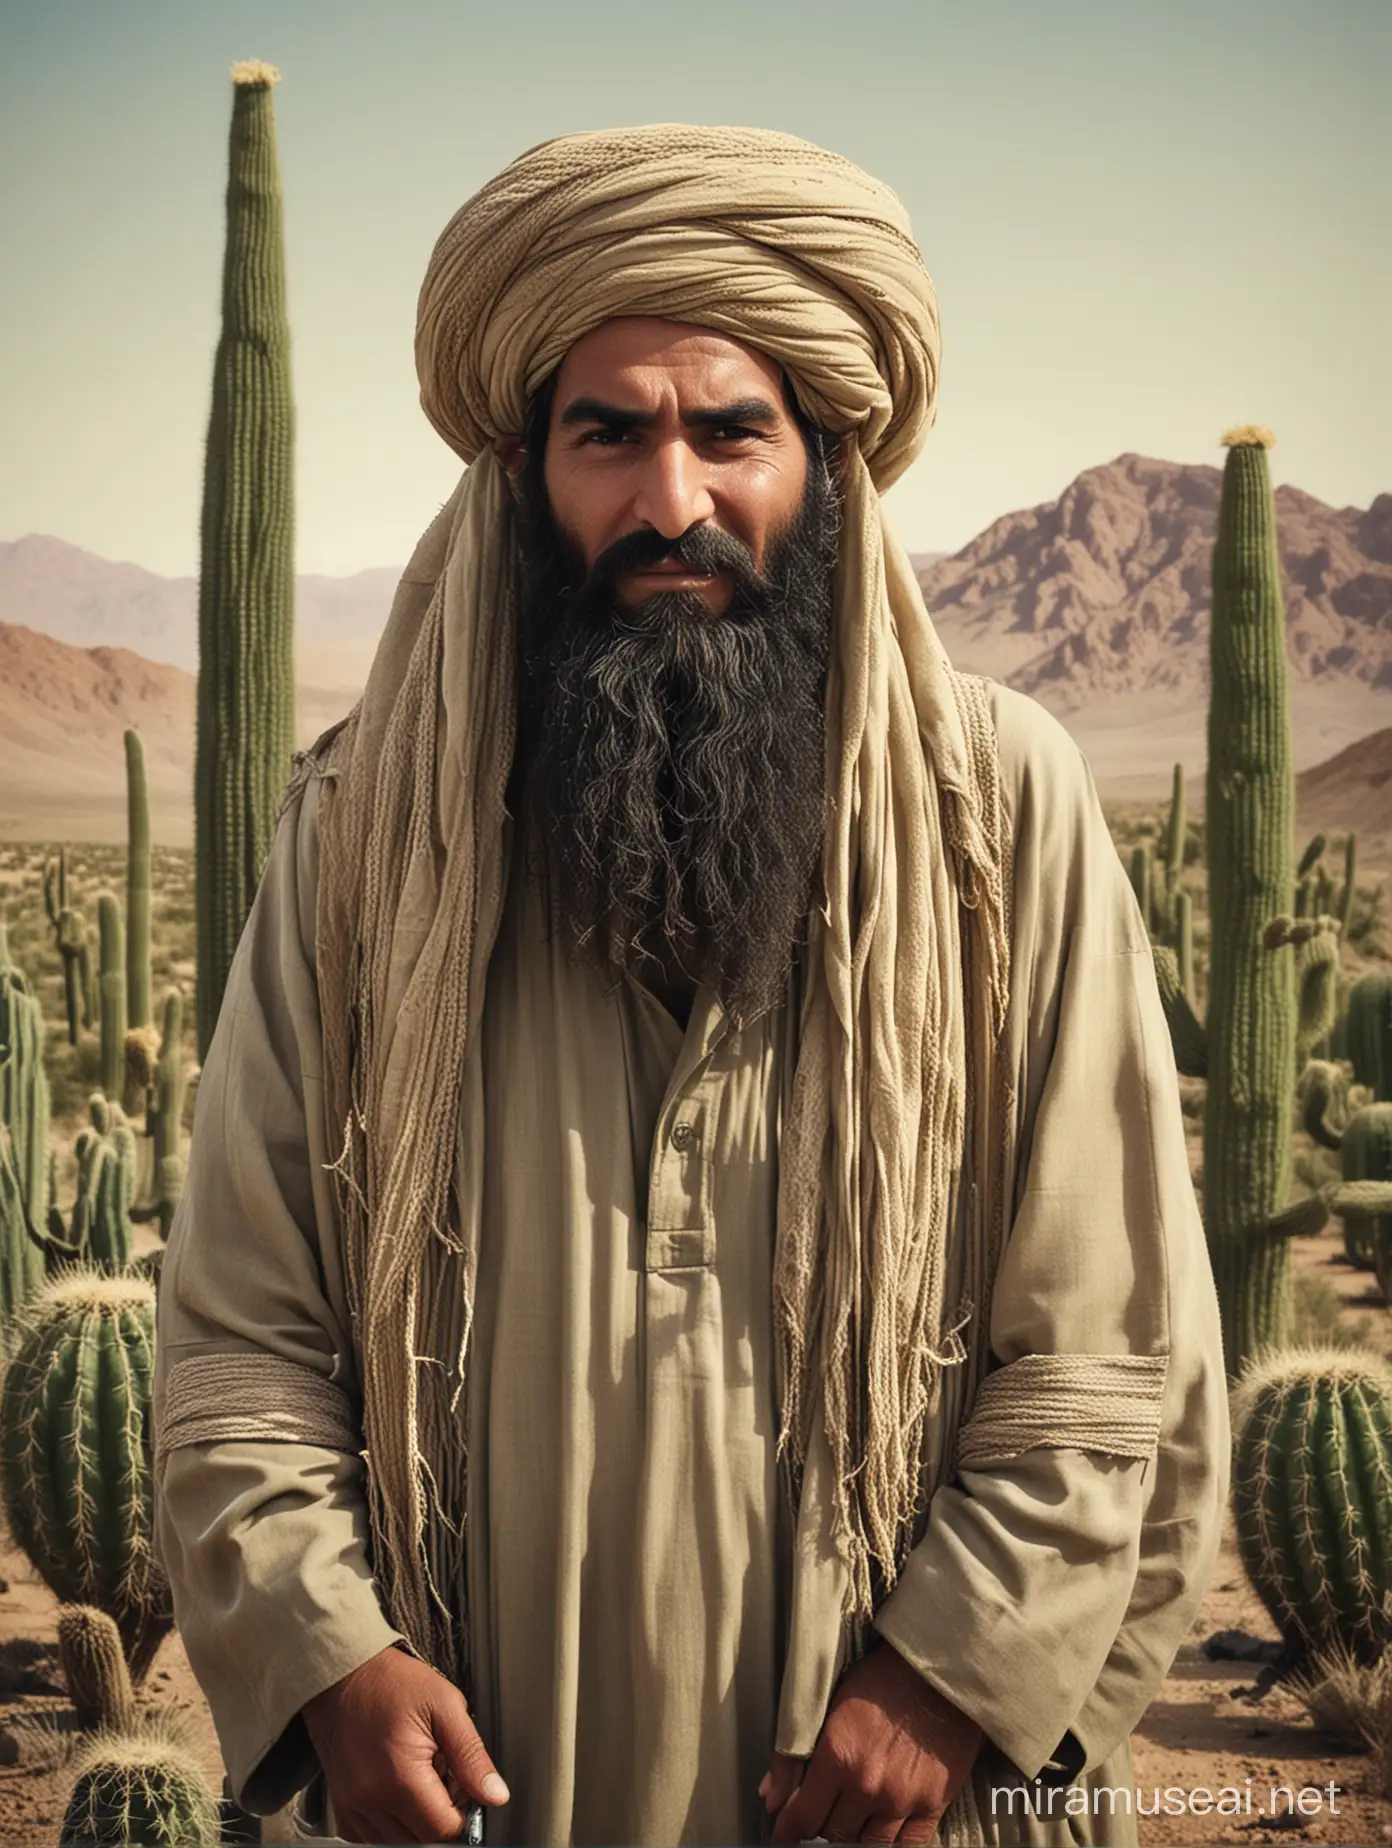 Mullah with Cactus in the Ass Weeping